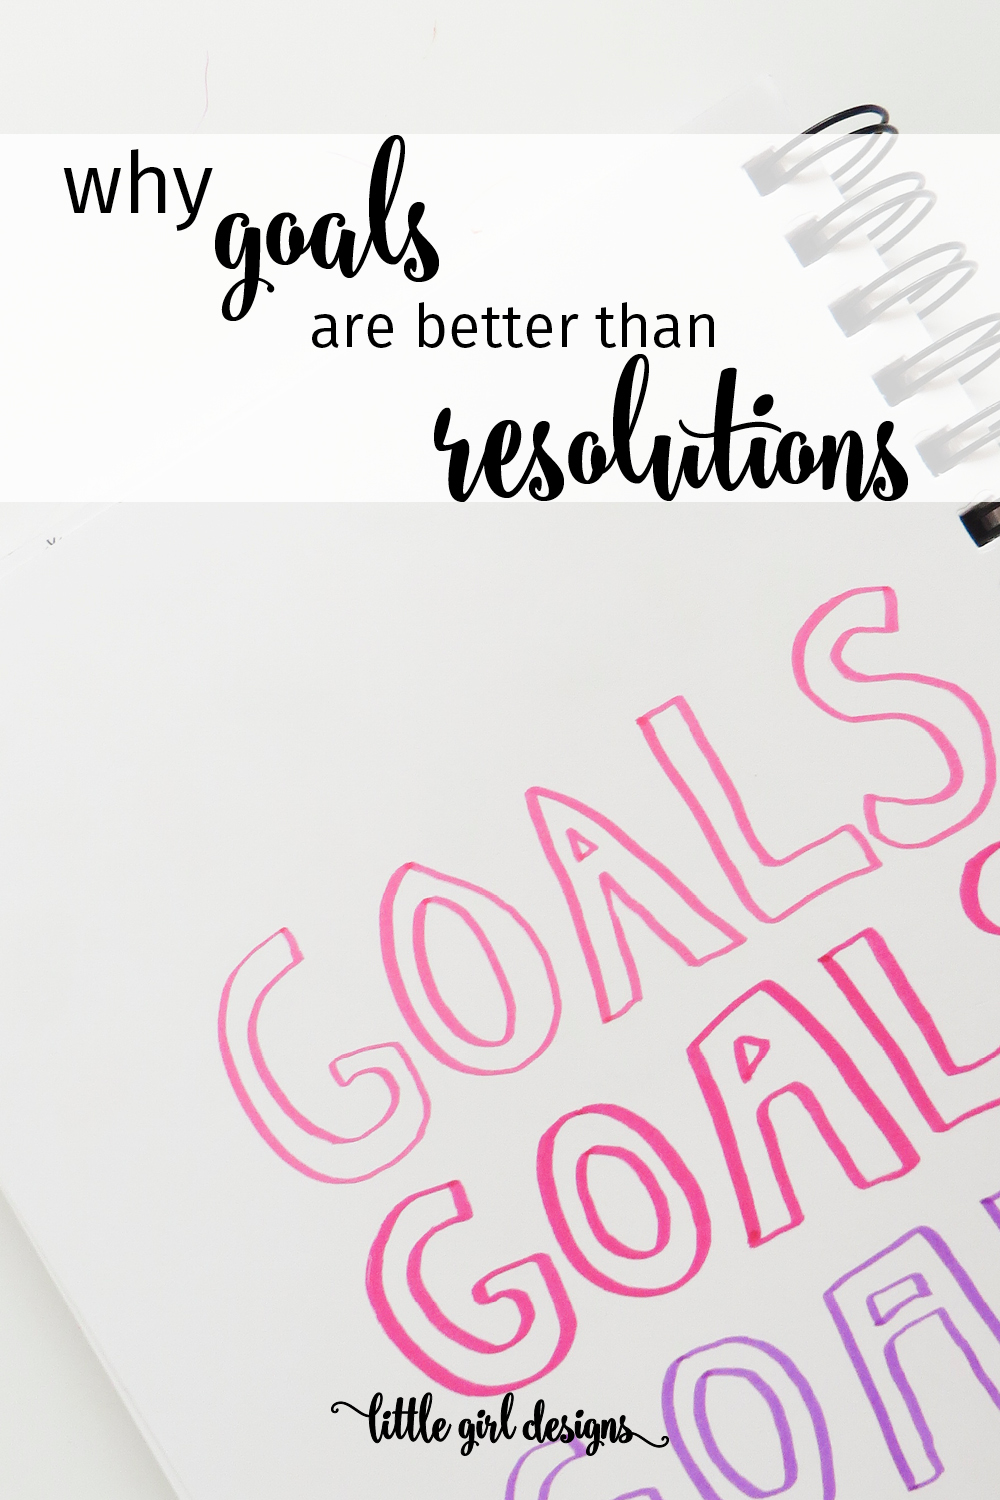 How to Make Goals Instead of Resolutions for the new year! You'll be much happier when you make doable (and trackable) goals rather than just wishing for change. Here are some tips.